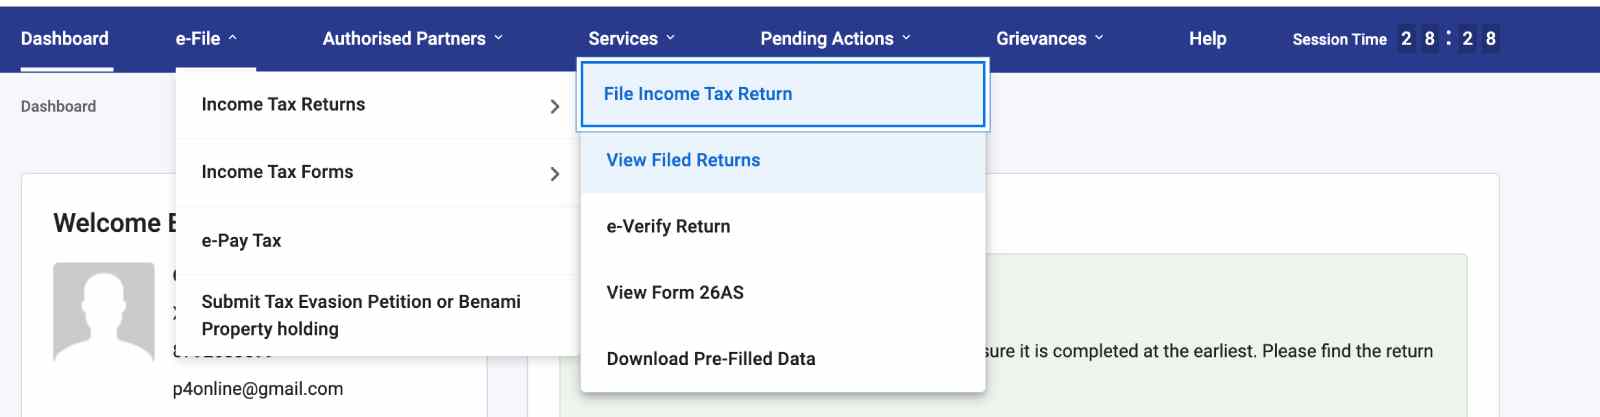 Select view filed returns from menu